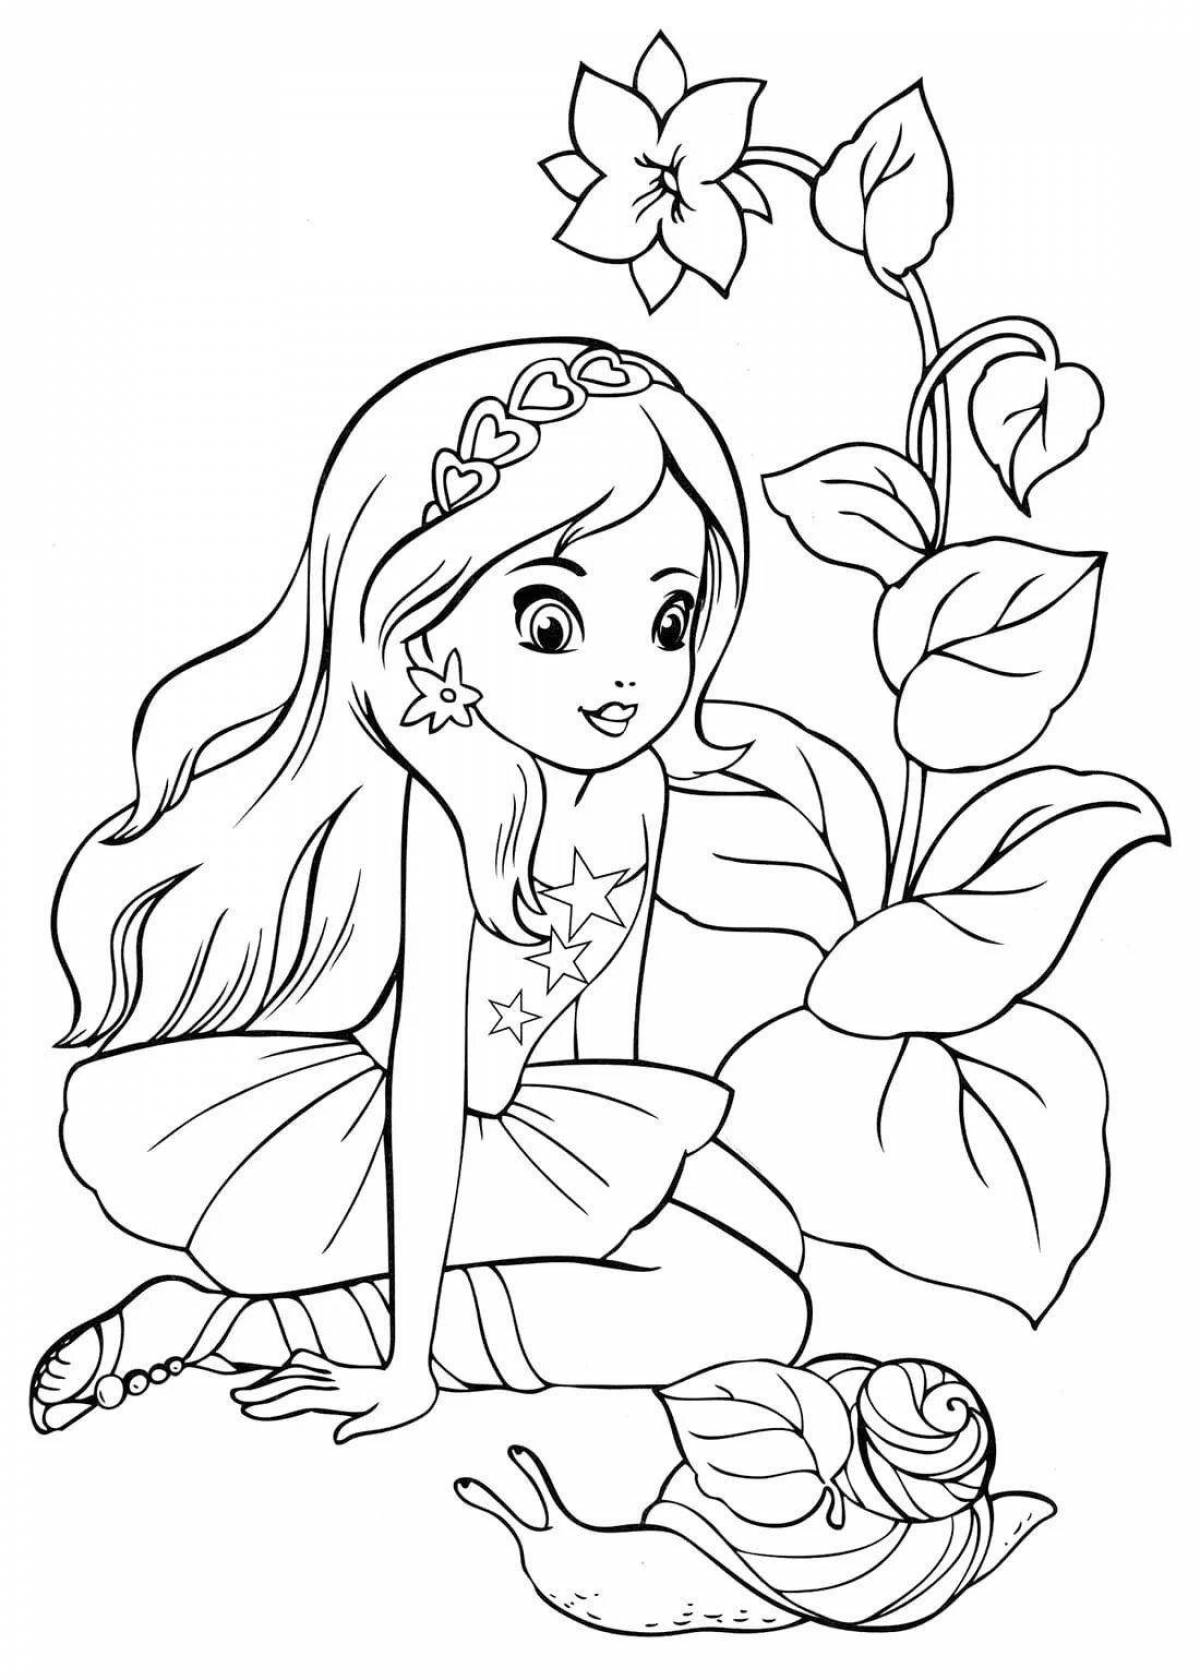 Violent coloring page 5 for girls